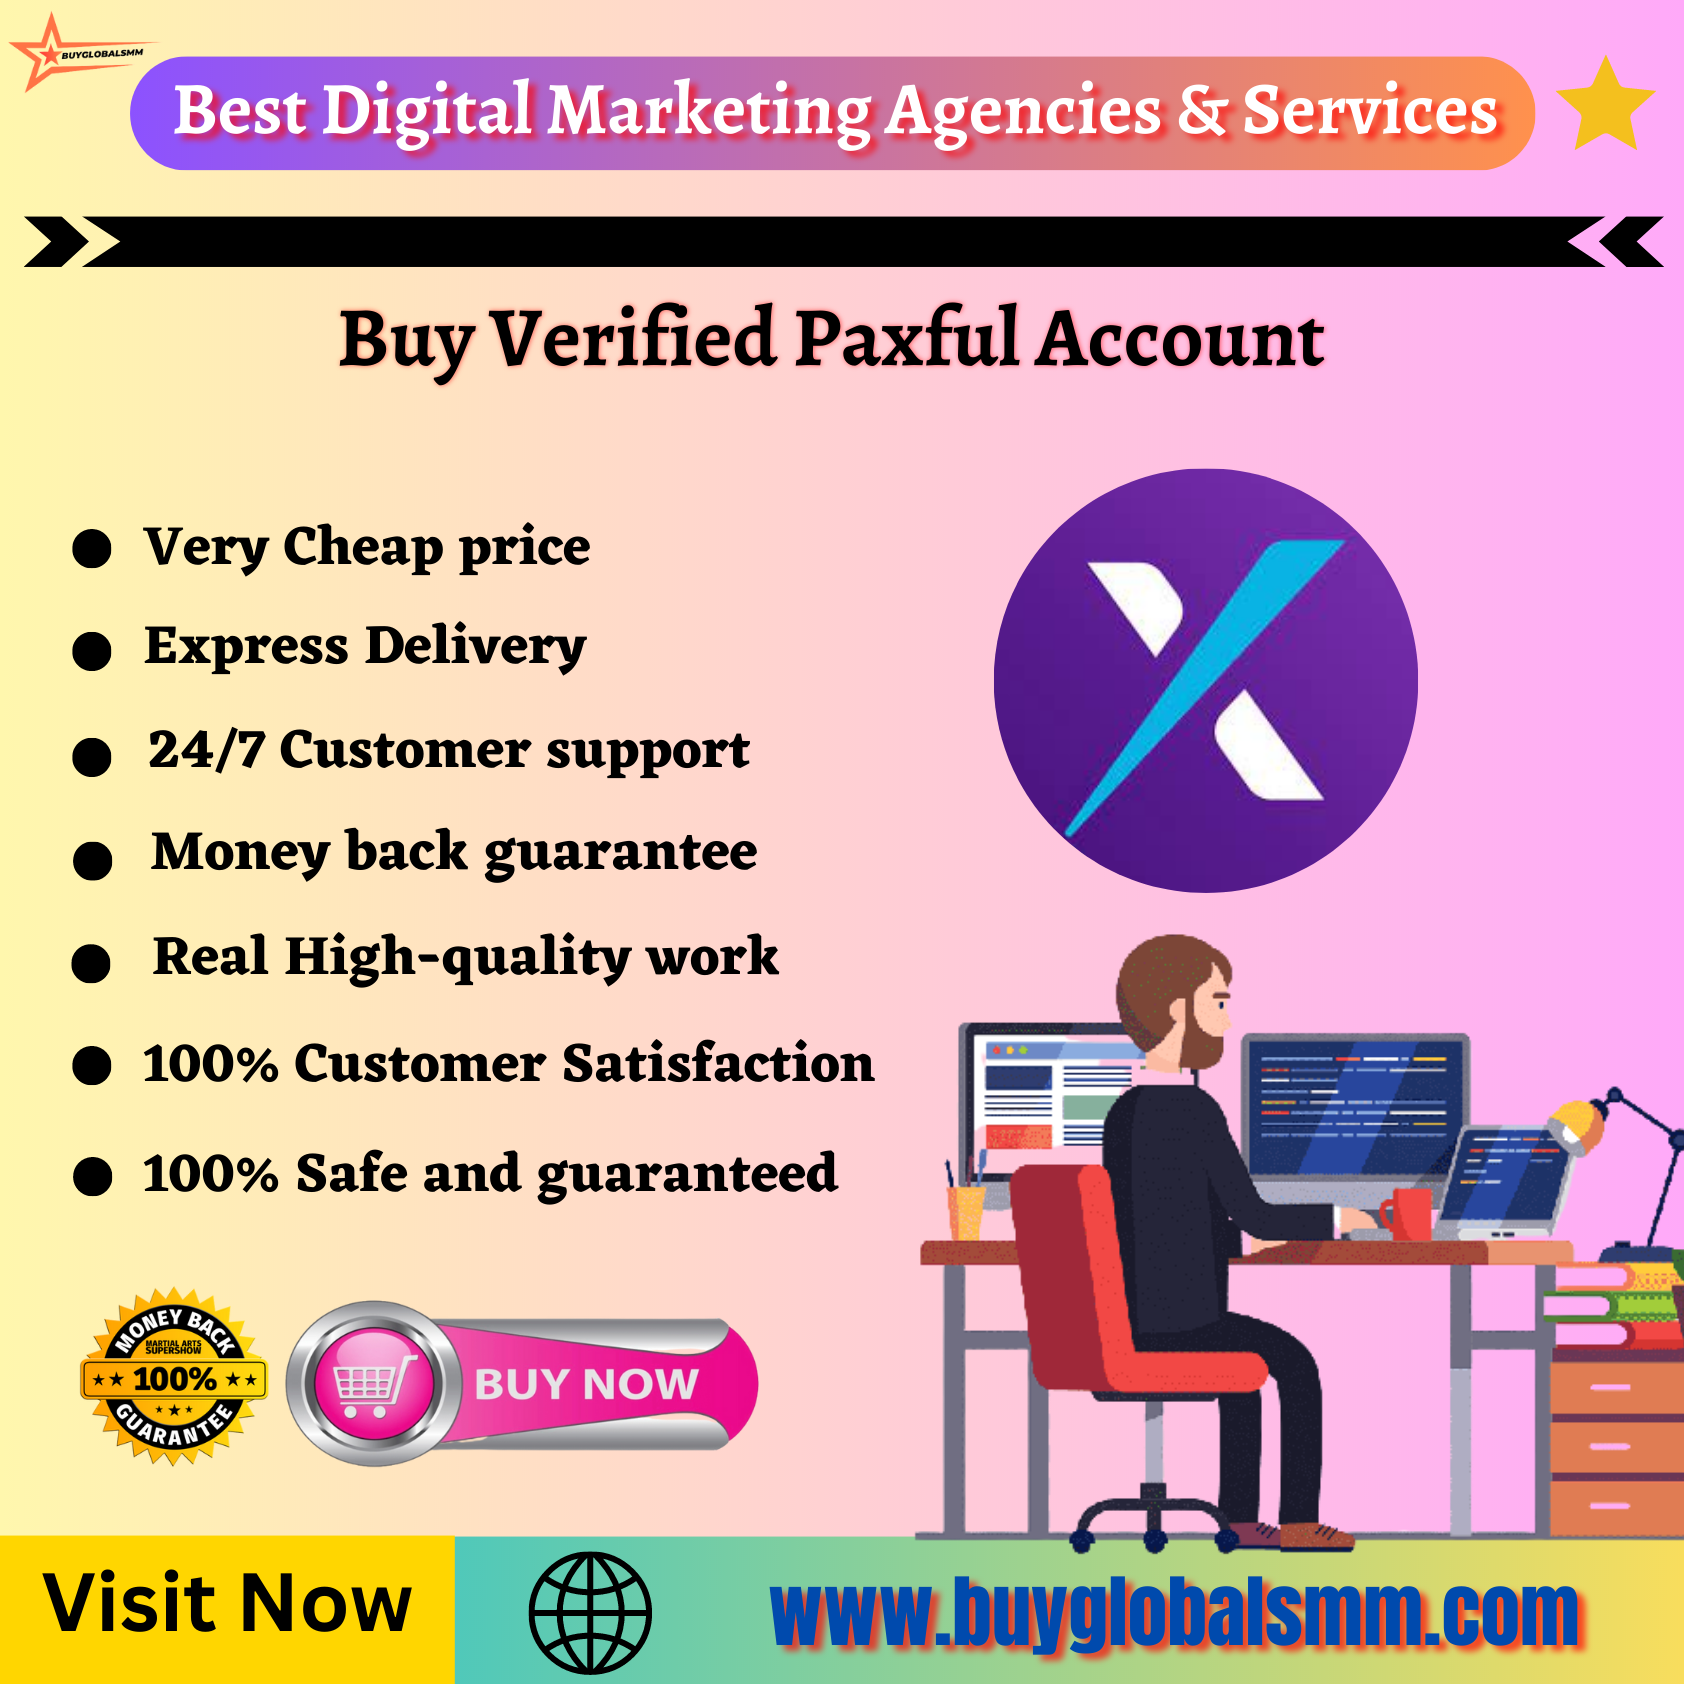 Buy Verified Paxful Account- 100% Fully Verified & safe...